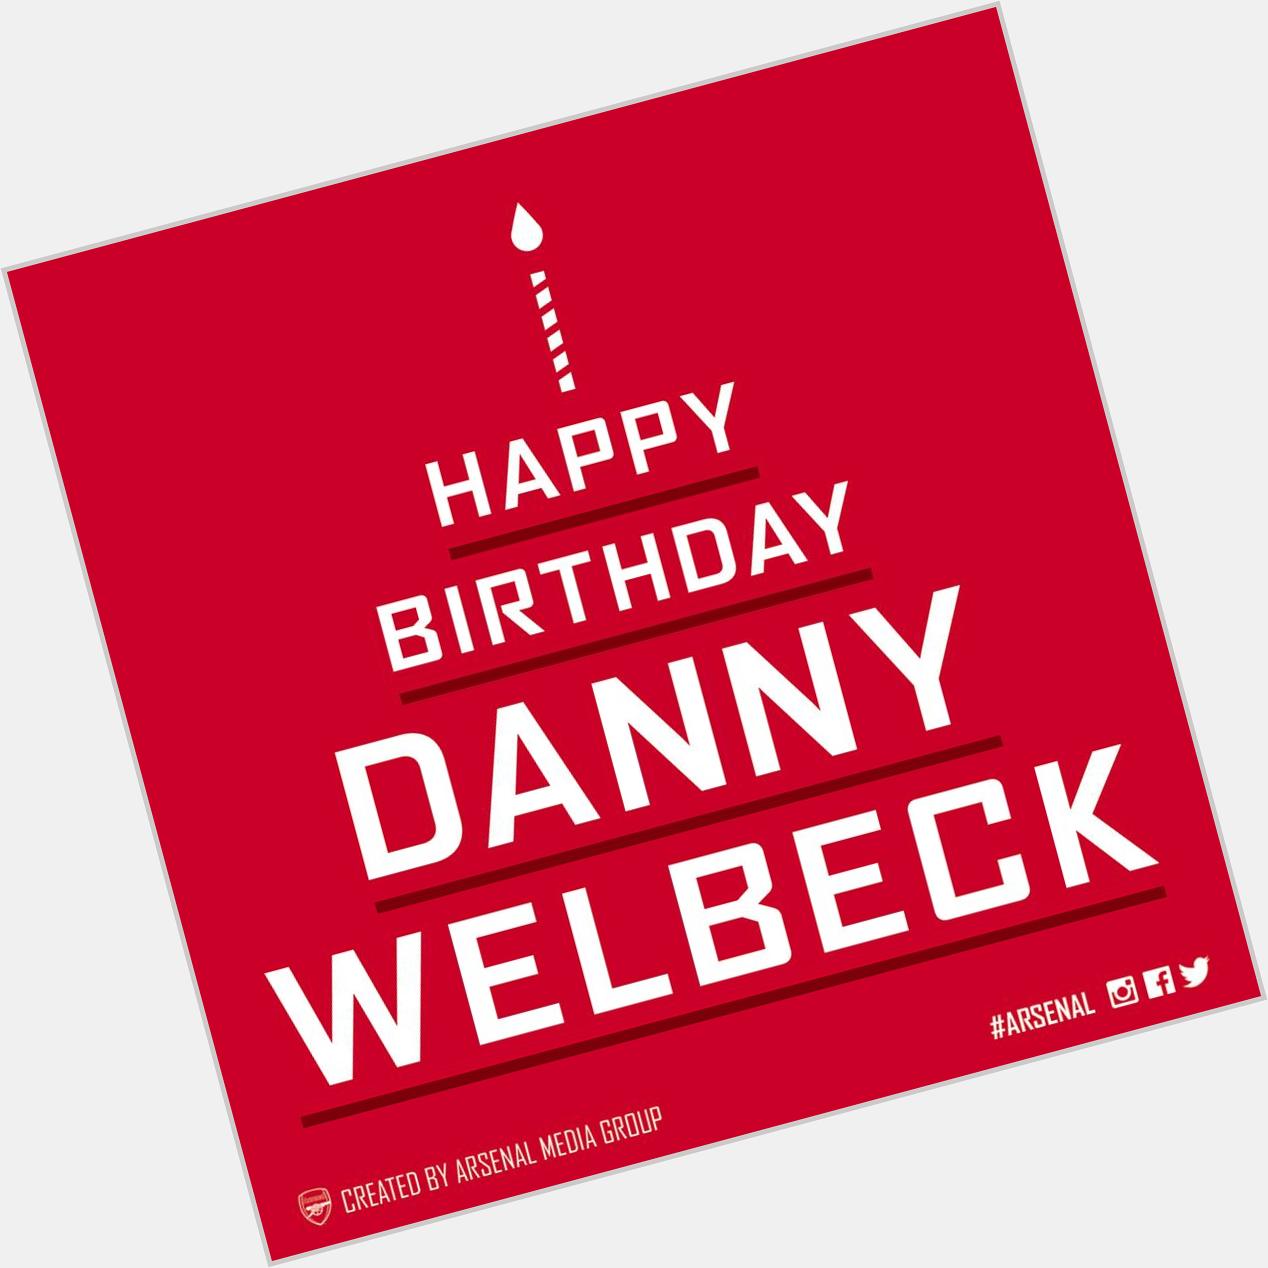 Happy birthday to Danny Welbeck who turns 24 today! 